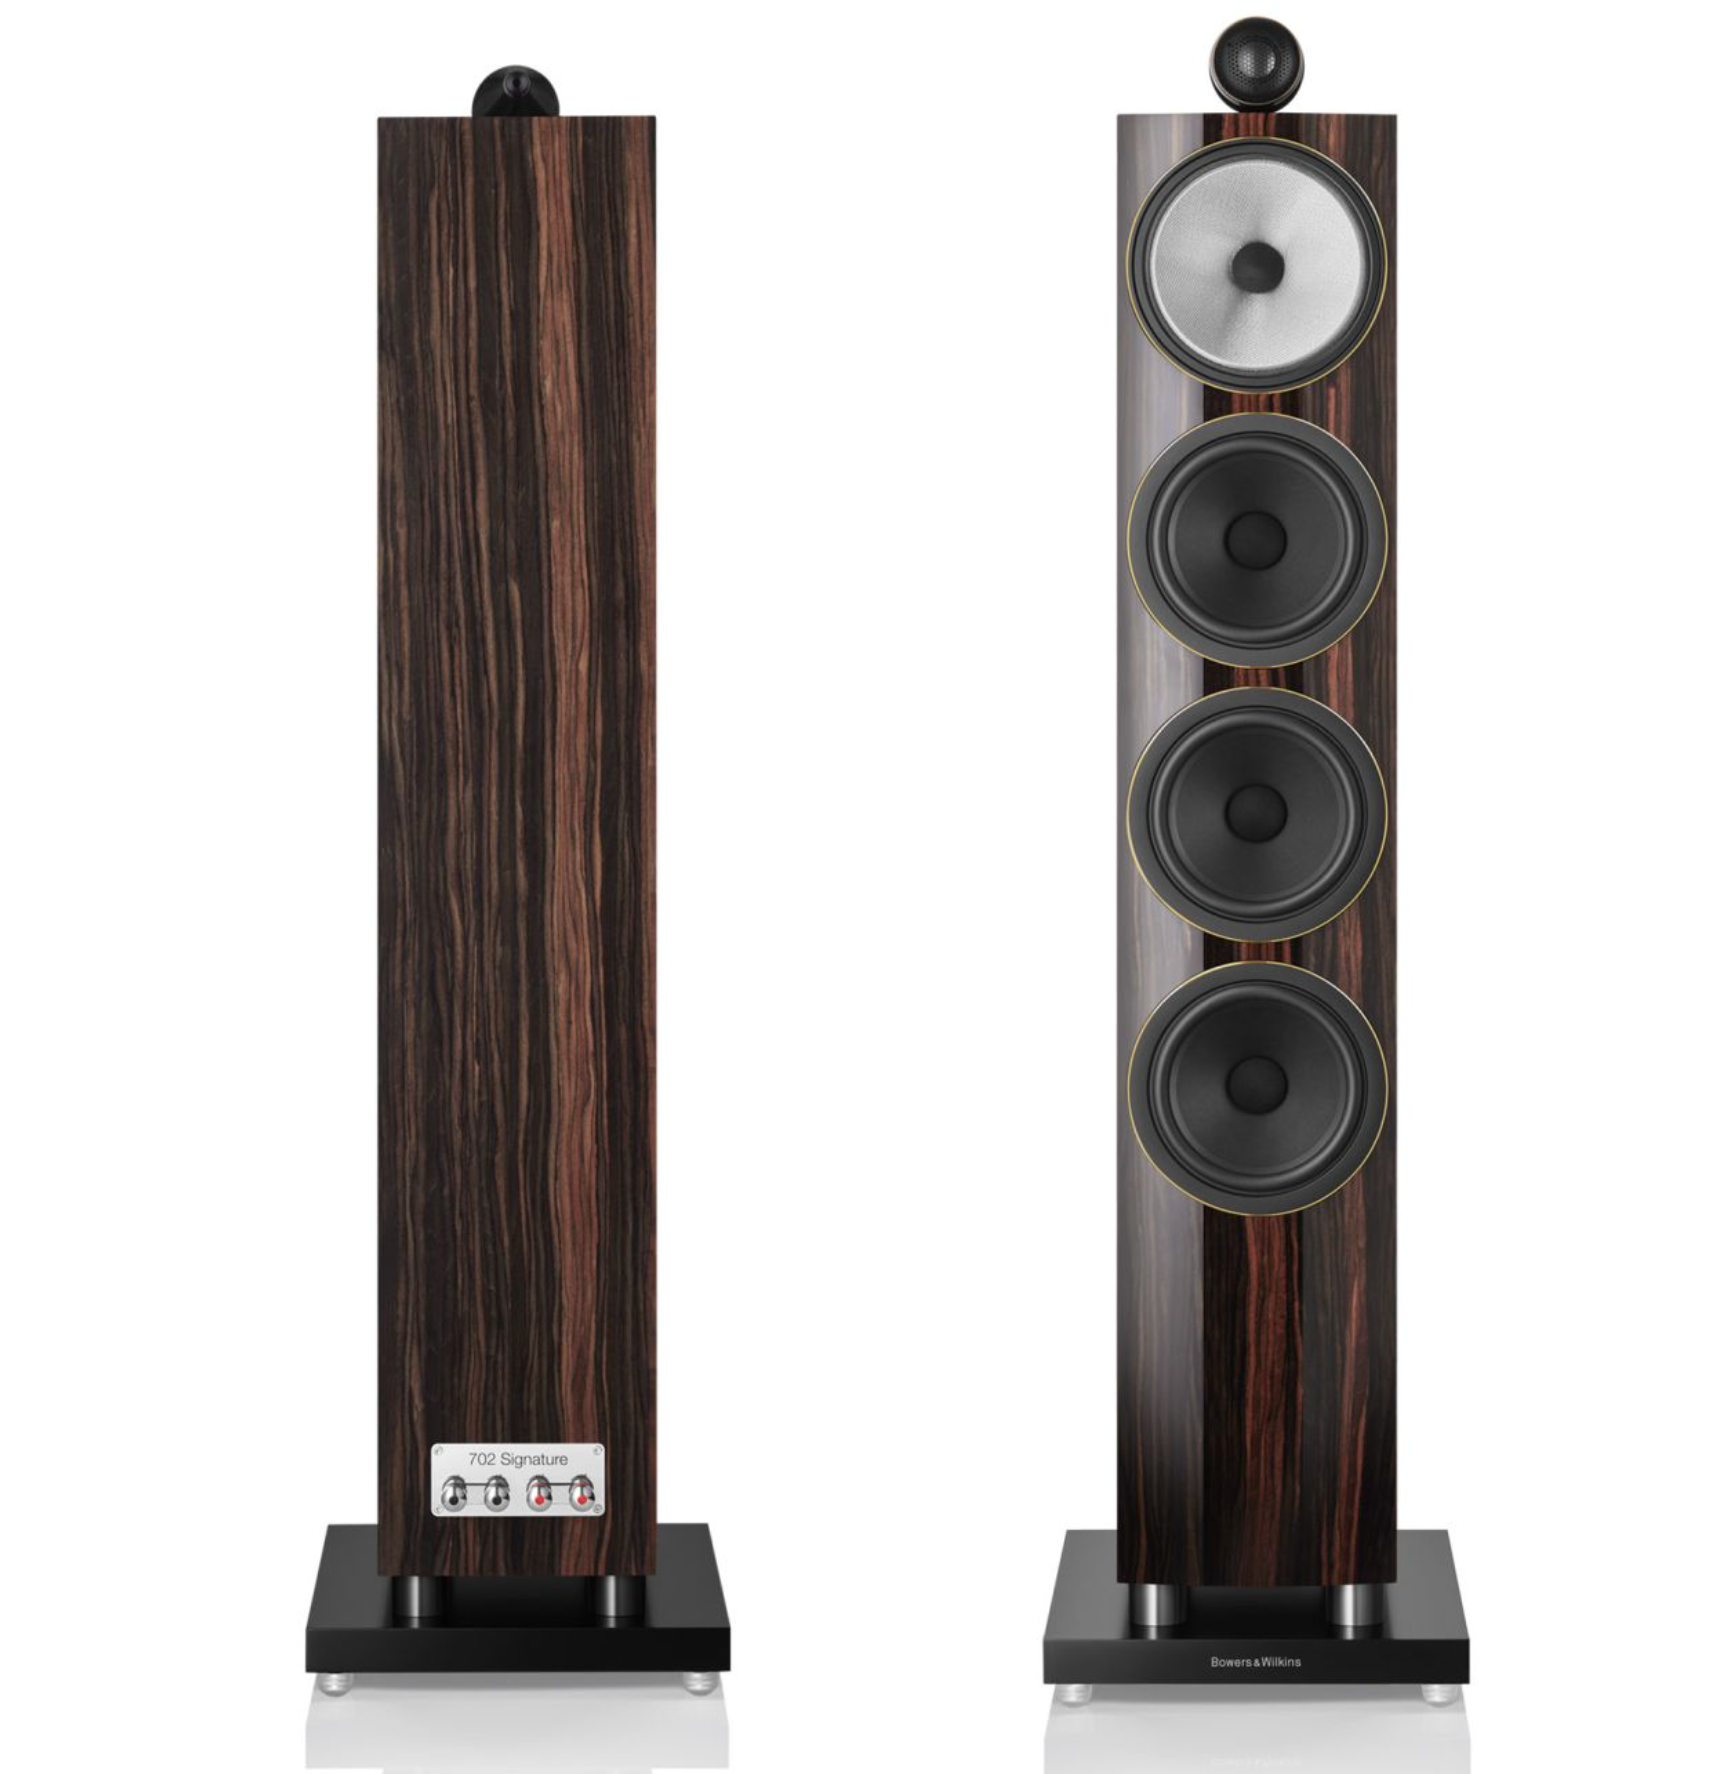 Bowers & Wilkins 702 S3 Signature Floorstanders in Datuk Gloss. Image shows back and front of speakers